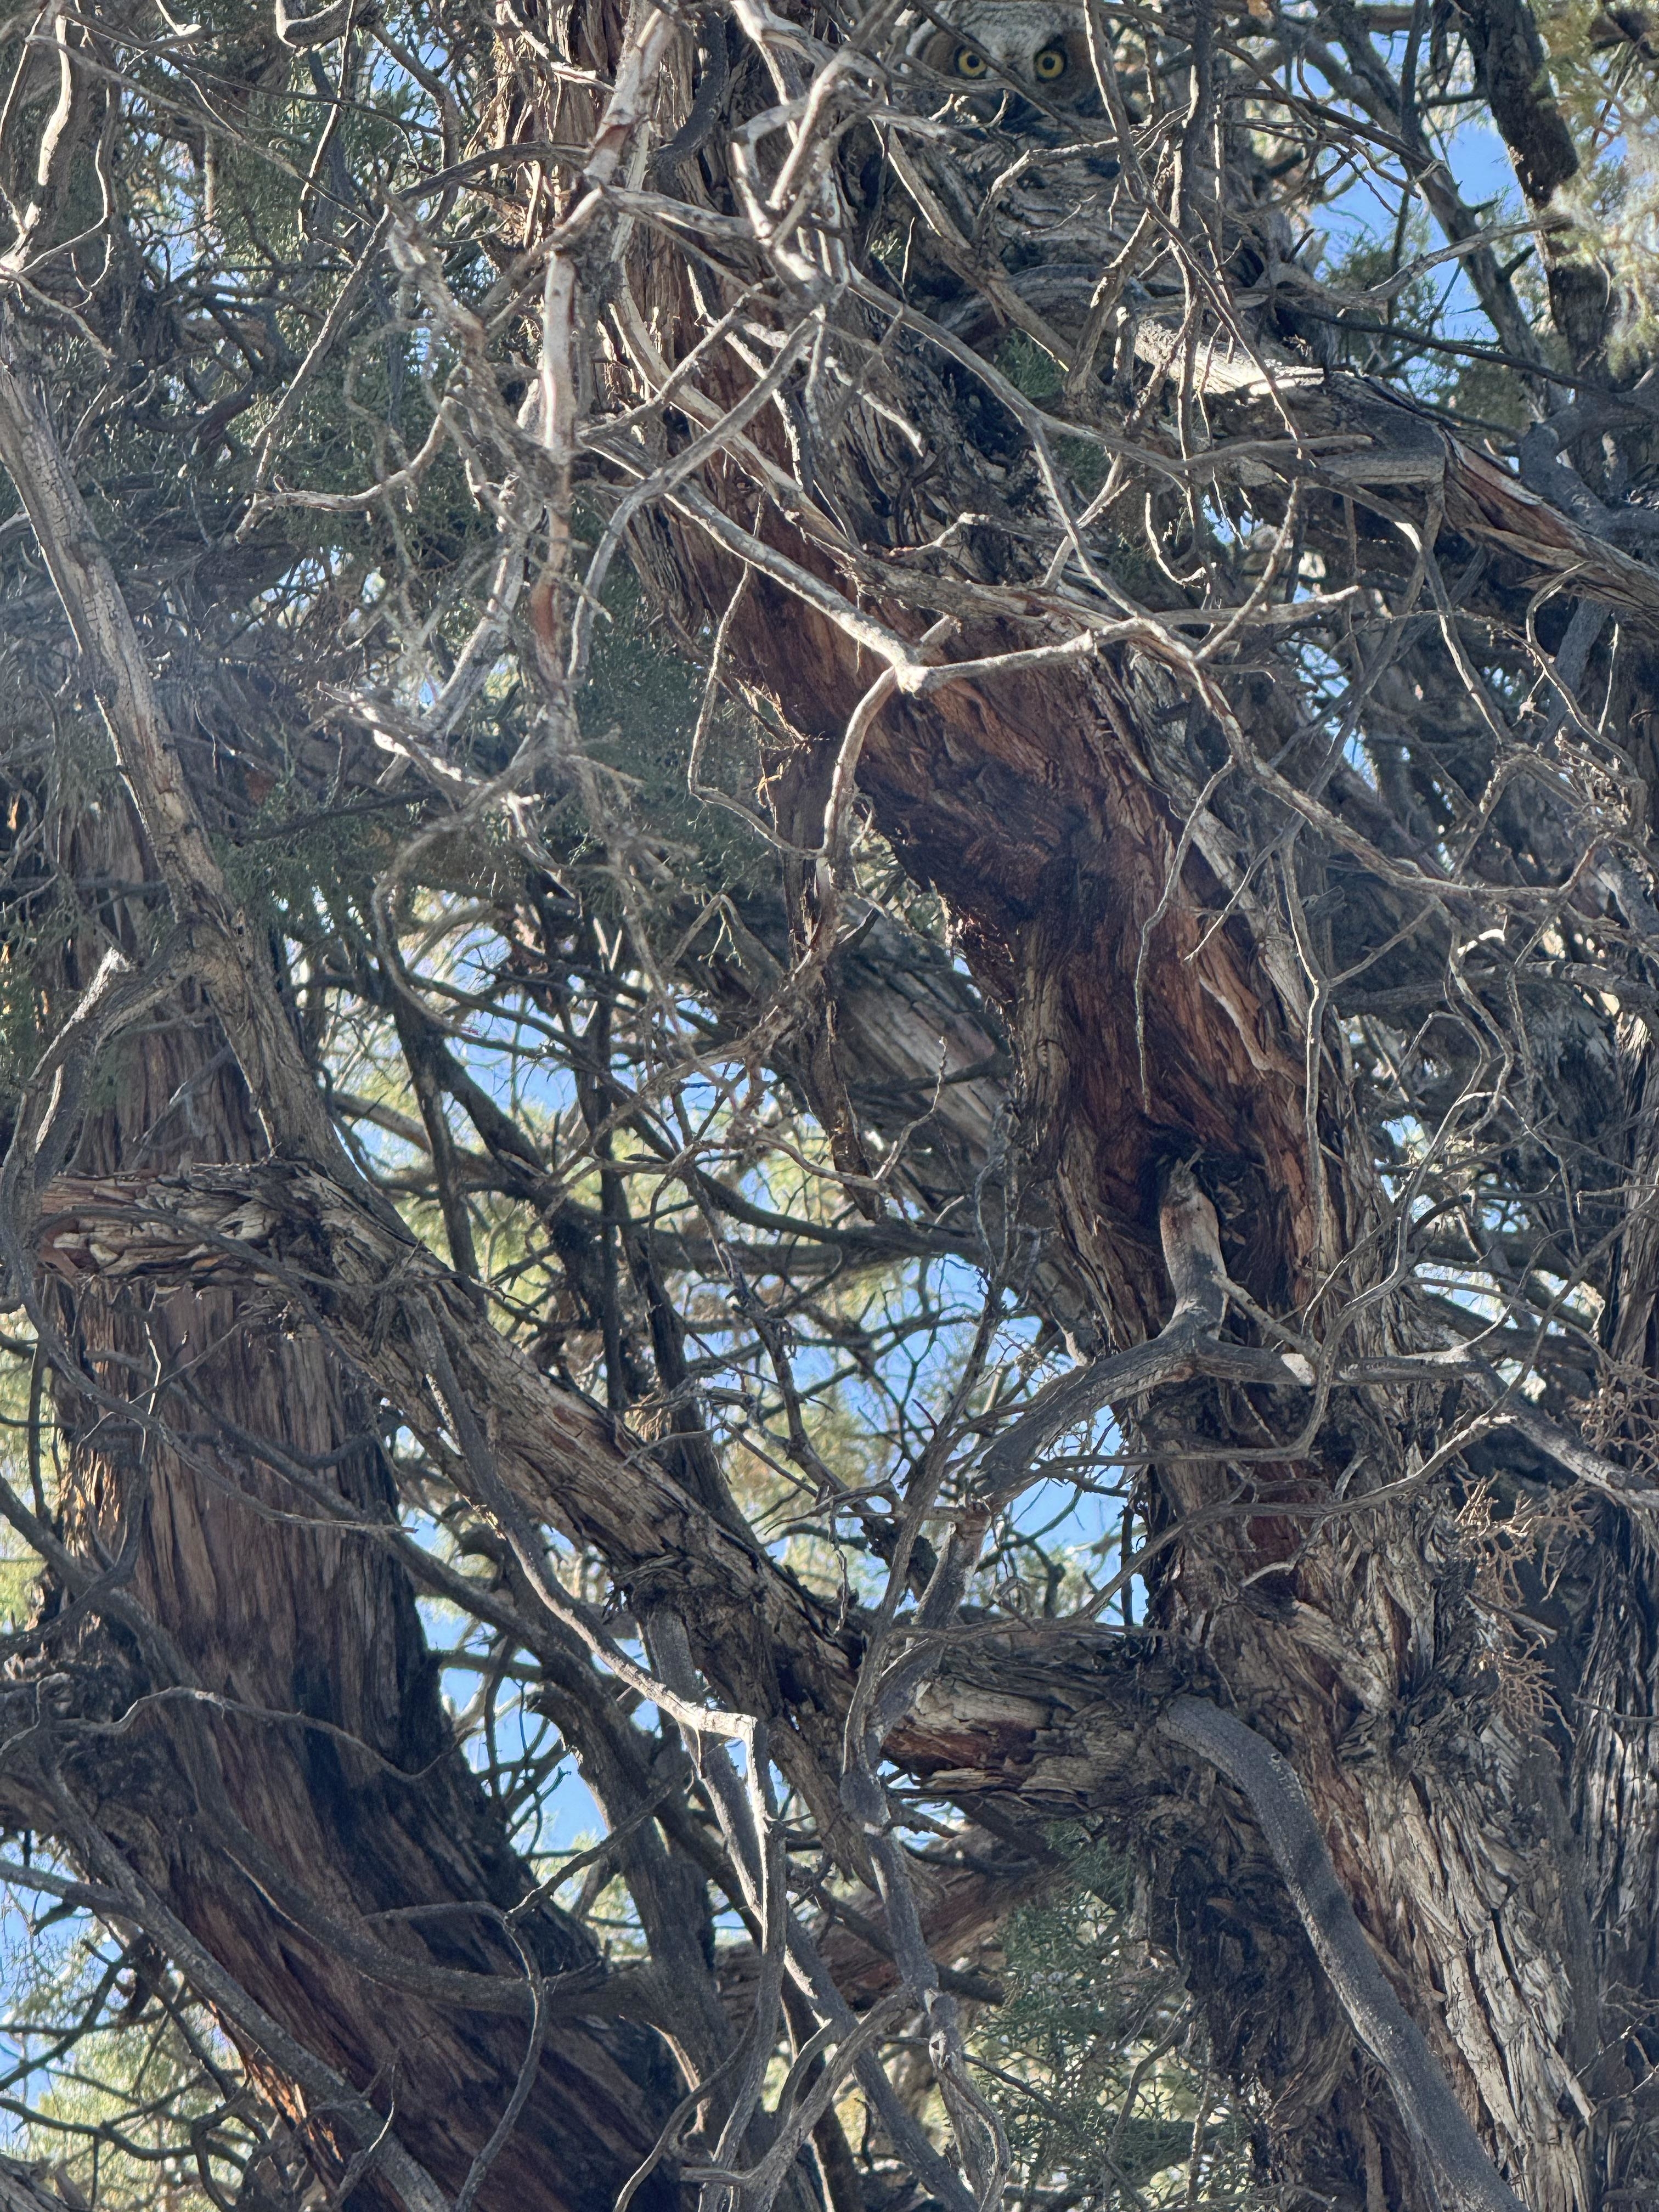 A well-camouflaged owl is perched among the twisted branches of a tree, blending seamlessly with its surroundings